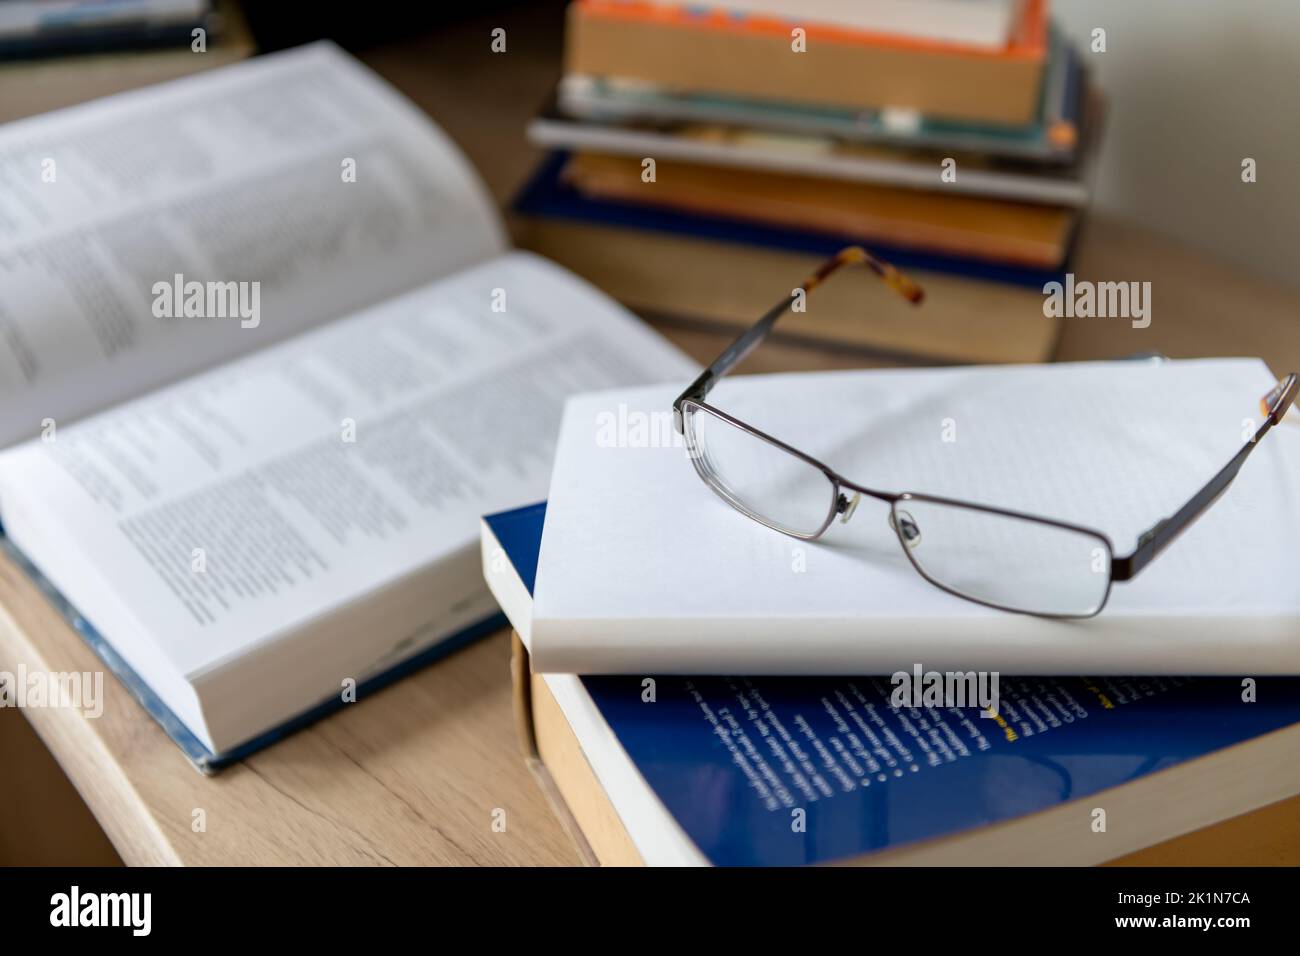 A pair of glasses and on a pile of printed books on a desk. Stock Photo